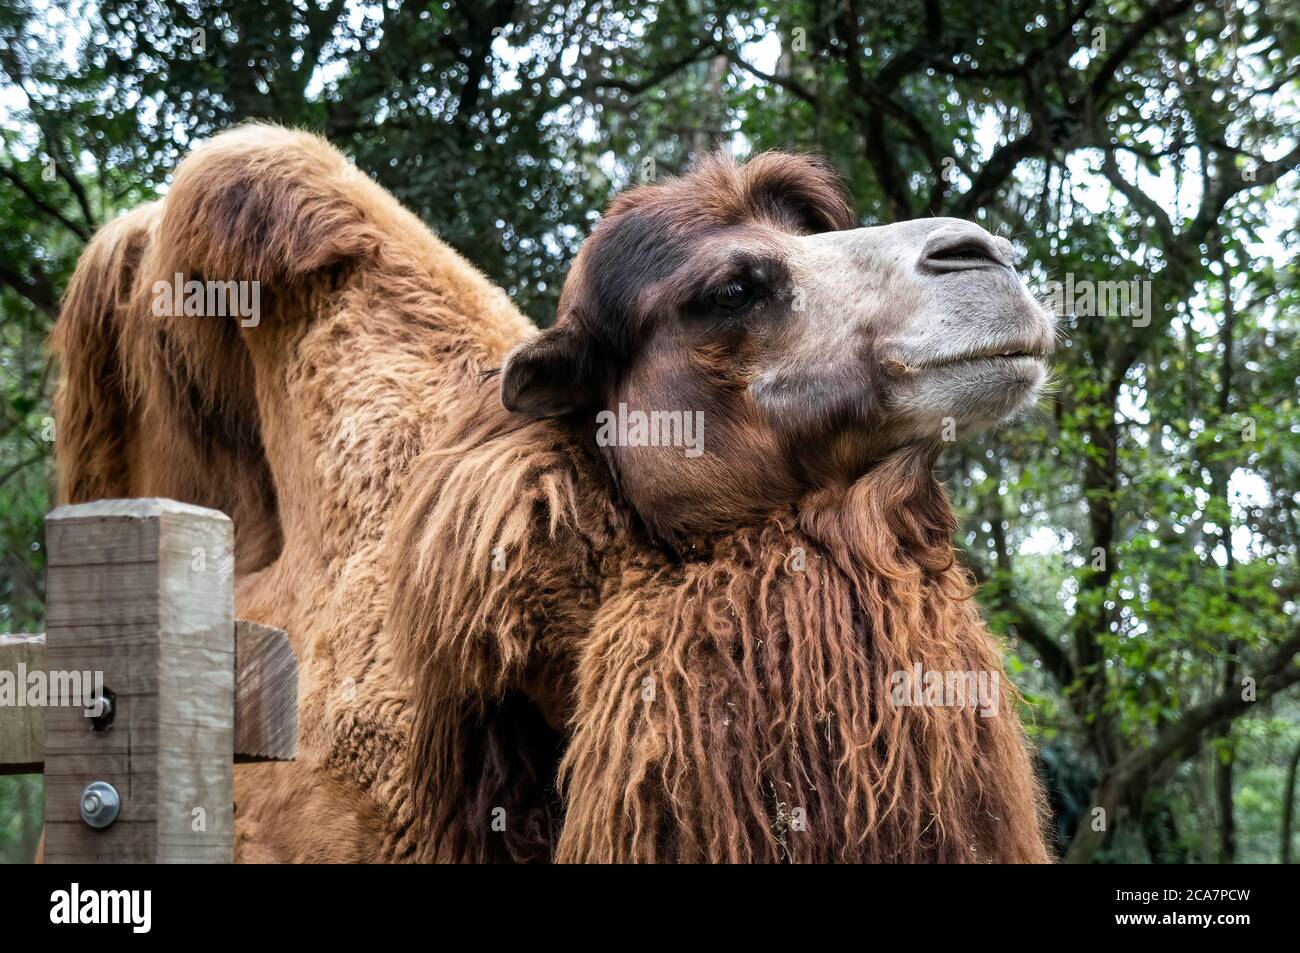 Bactrian Camel (Camelus bactrianus - large, even-toed ungulate native to the steppes of Central Asia and the largest living camel) in Zoo Safari park. Stock Photo